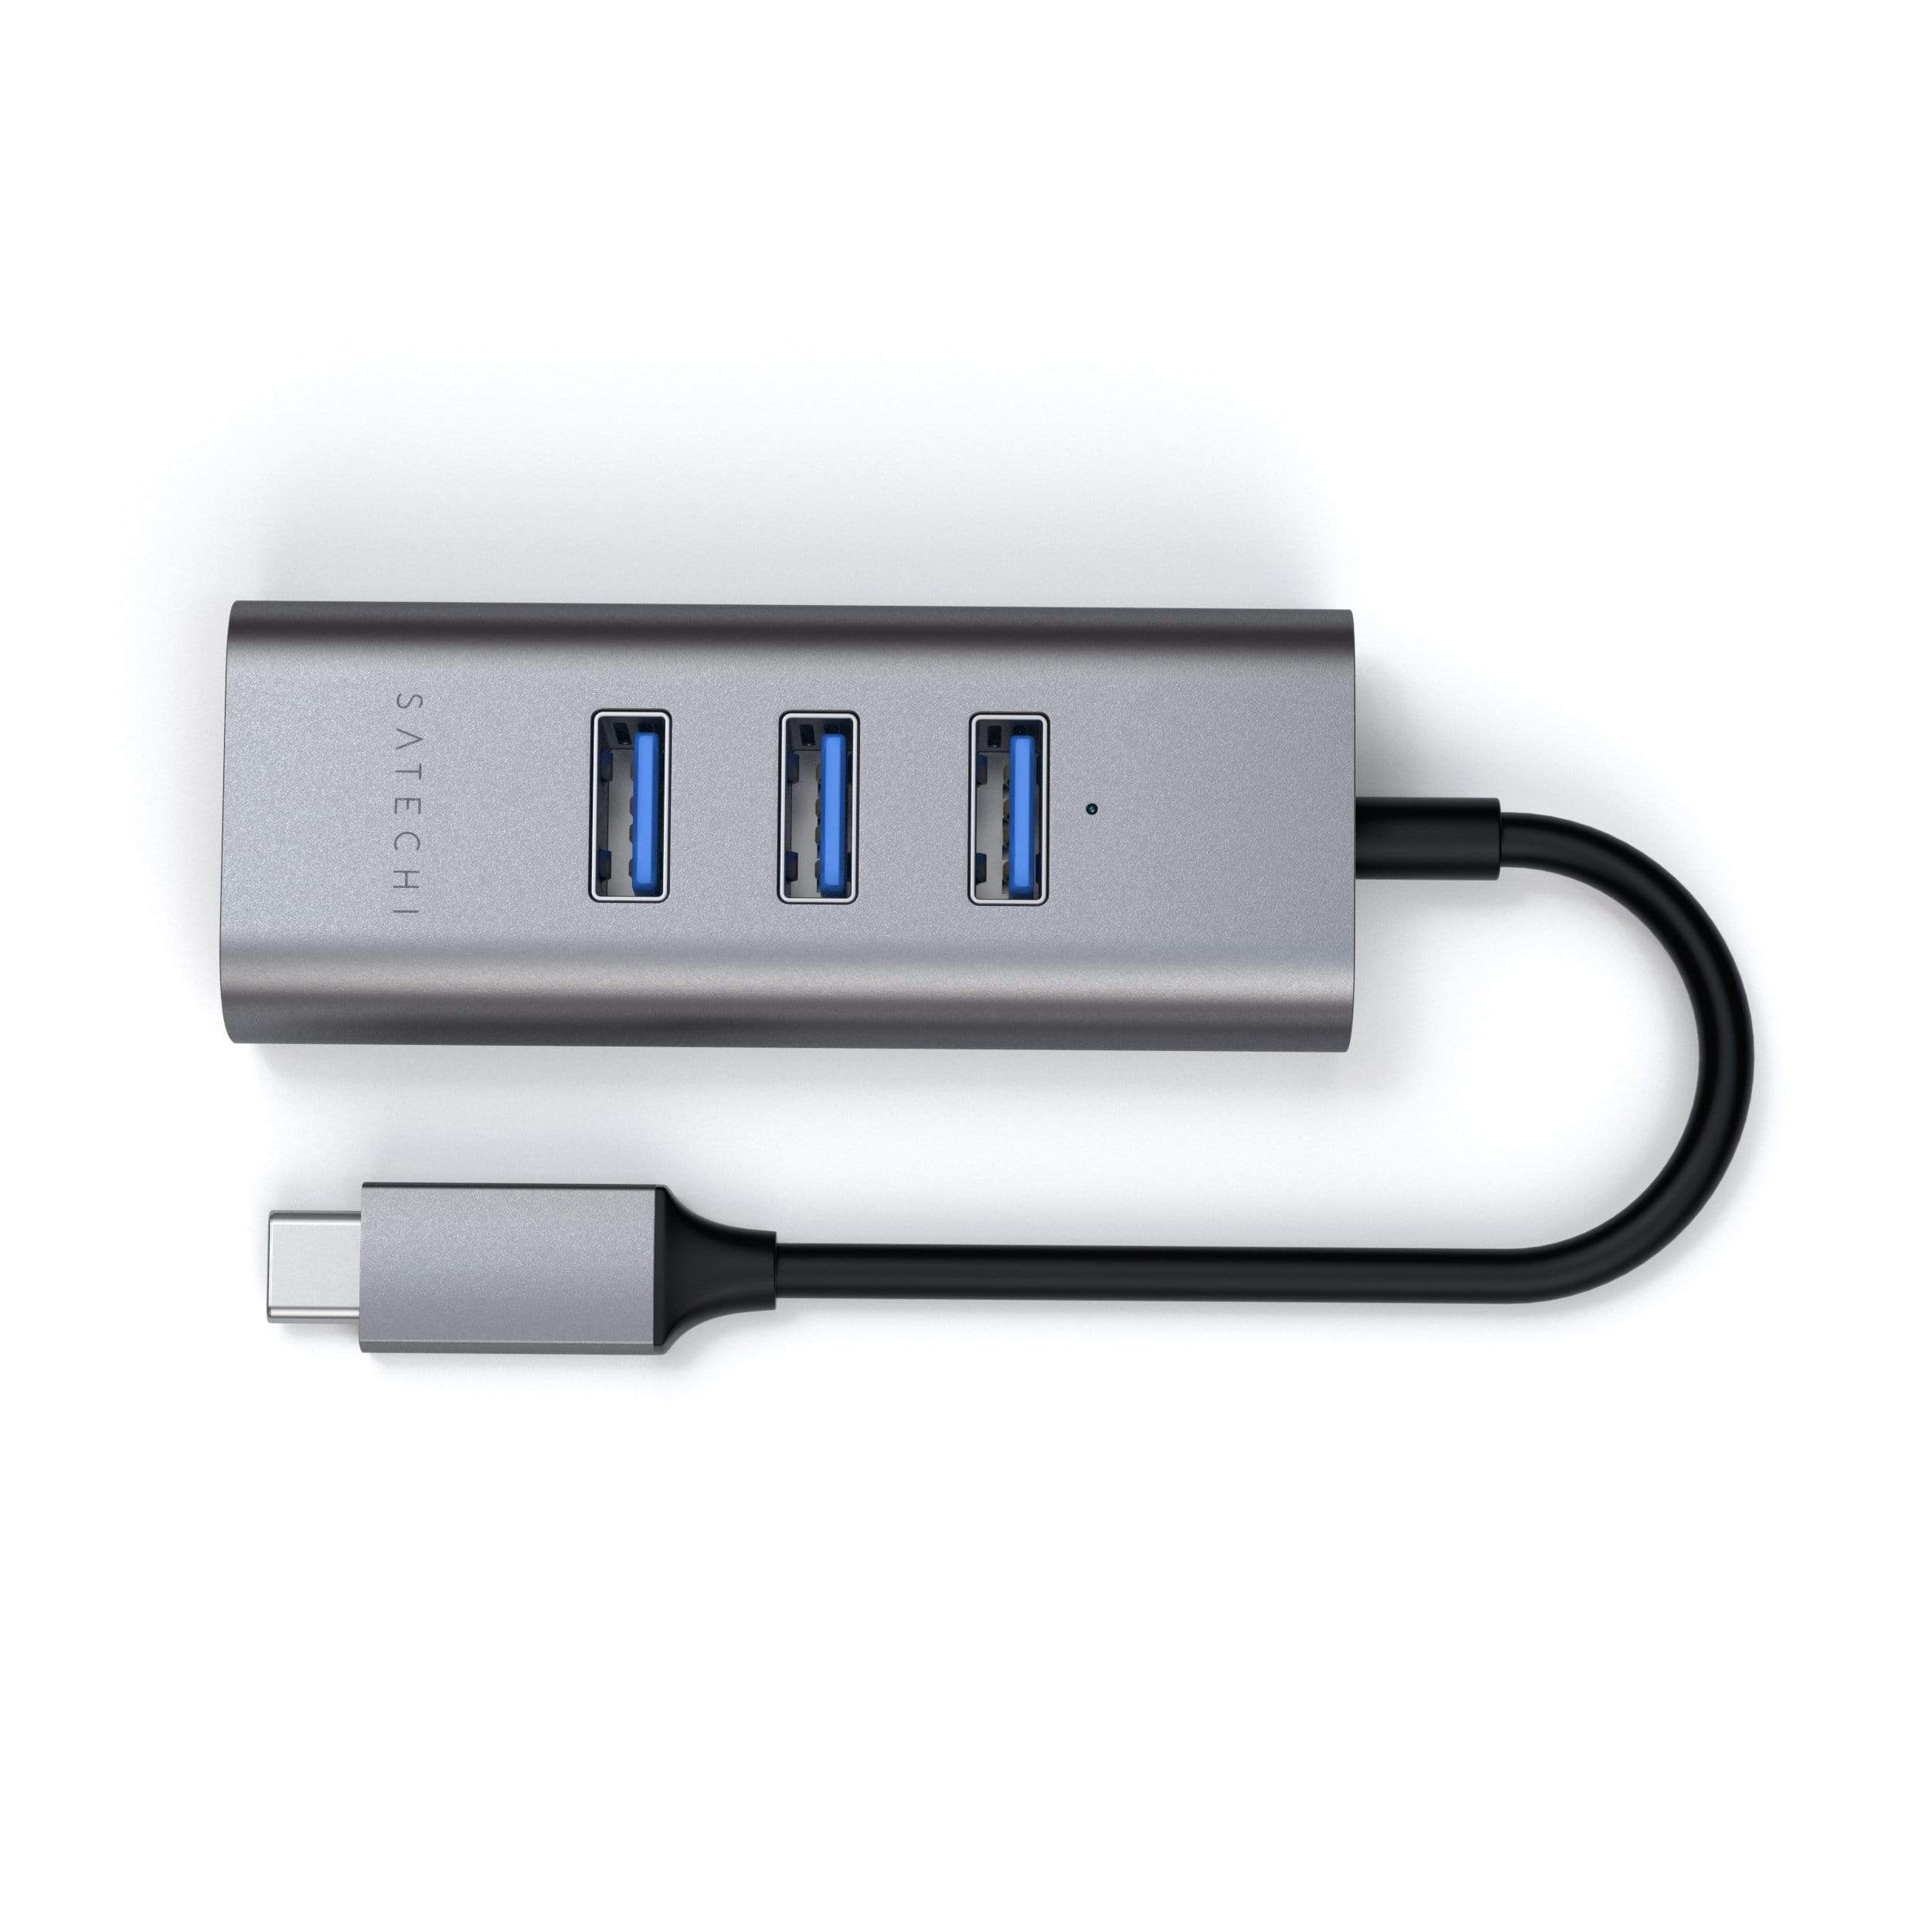 Type-C 2-in-1 Aluminum USB Hub with Ethernet Satechi